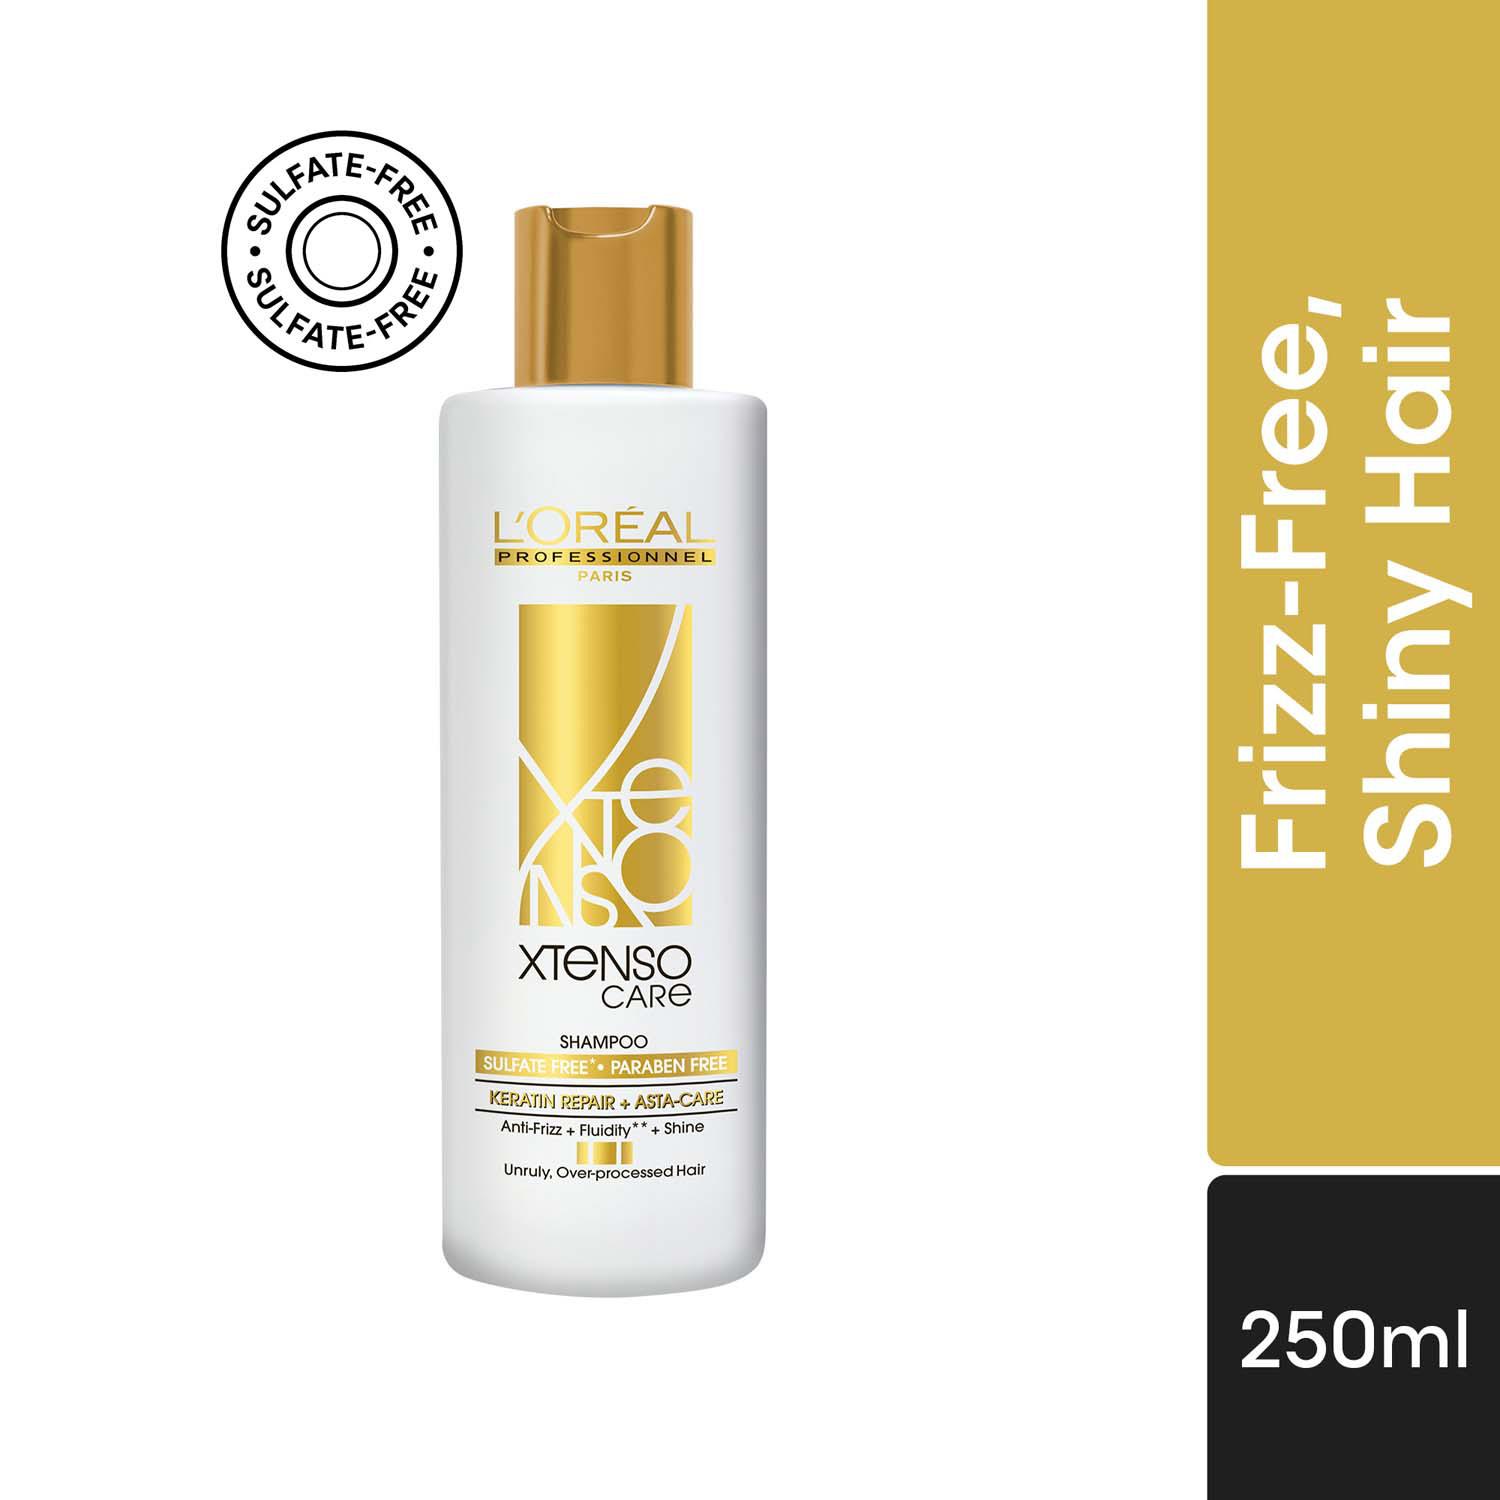 L'Oreal Professionnel | L'Oreal Professionnel Xtenso Care Sulfate free Shampoo for Frizz Free, & Manageable Hair (250 ml)